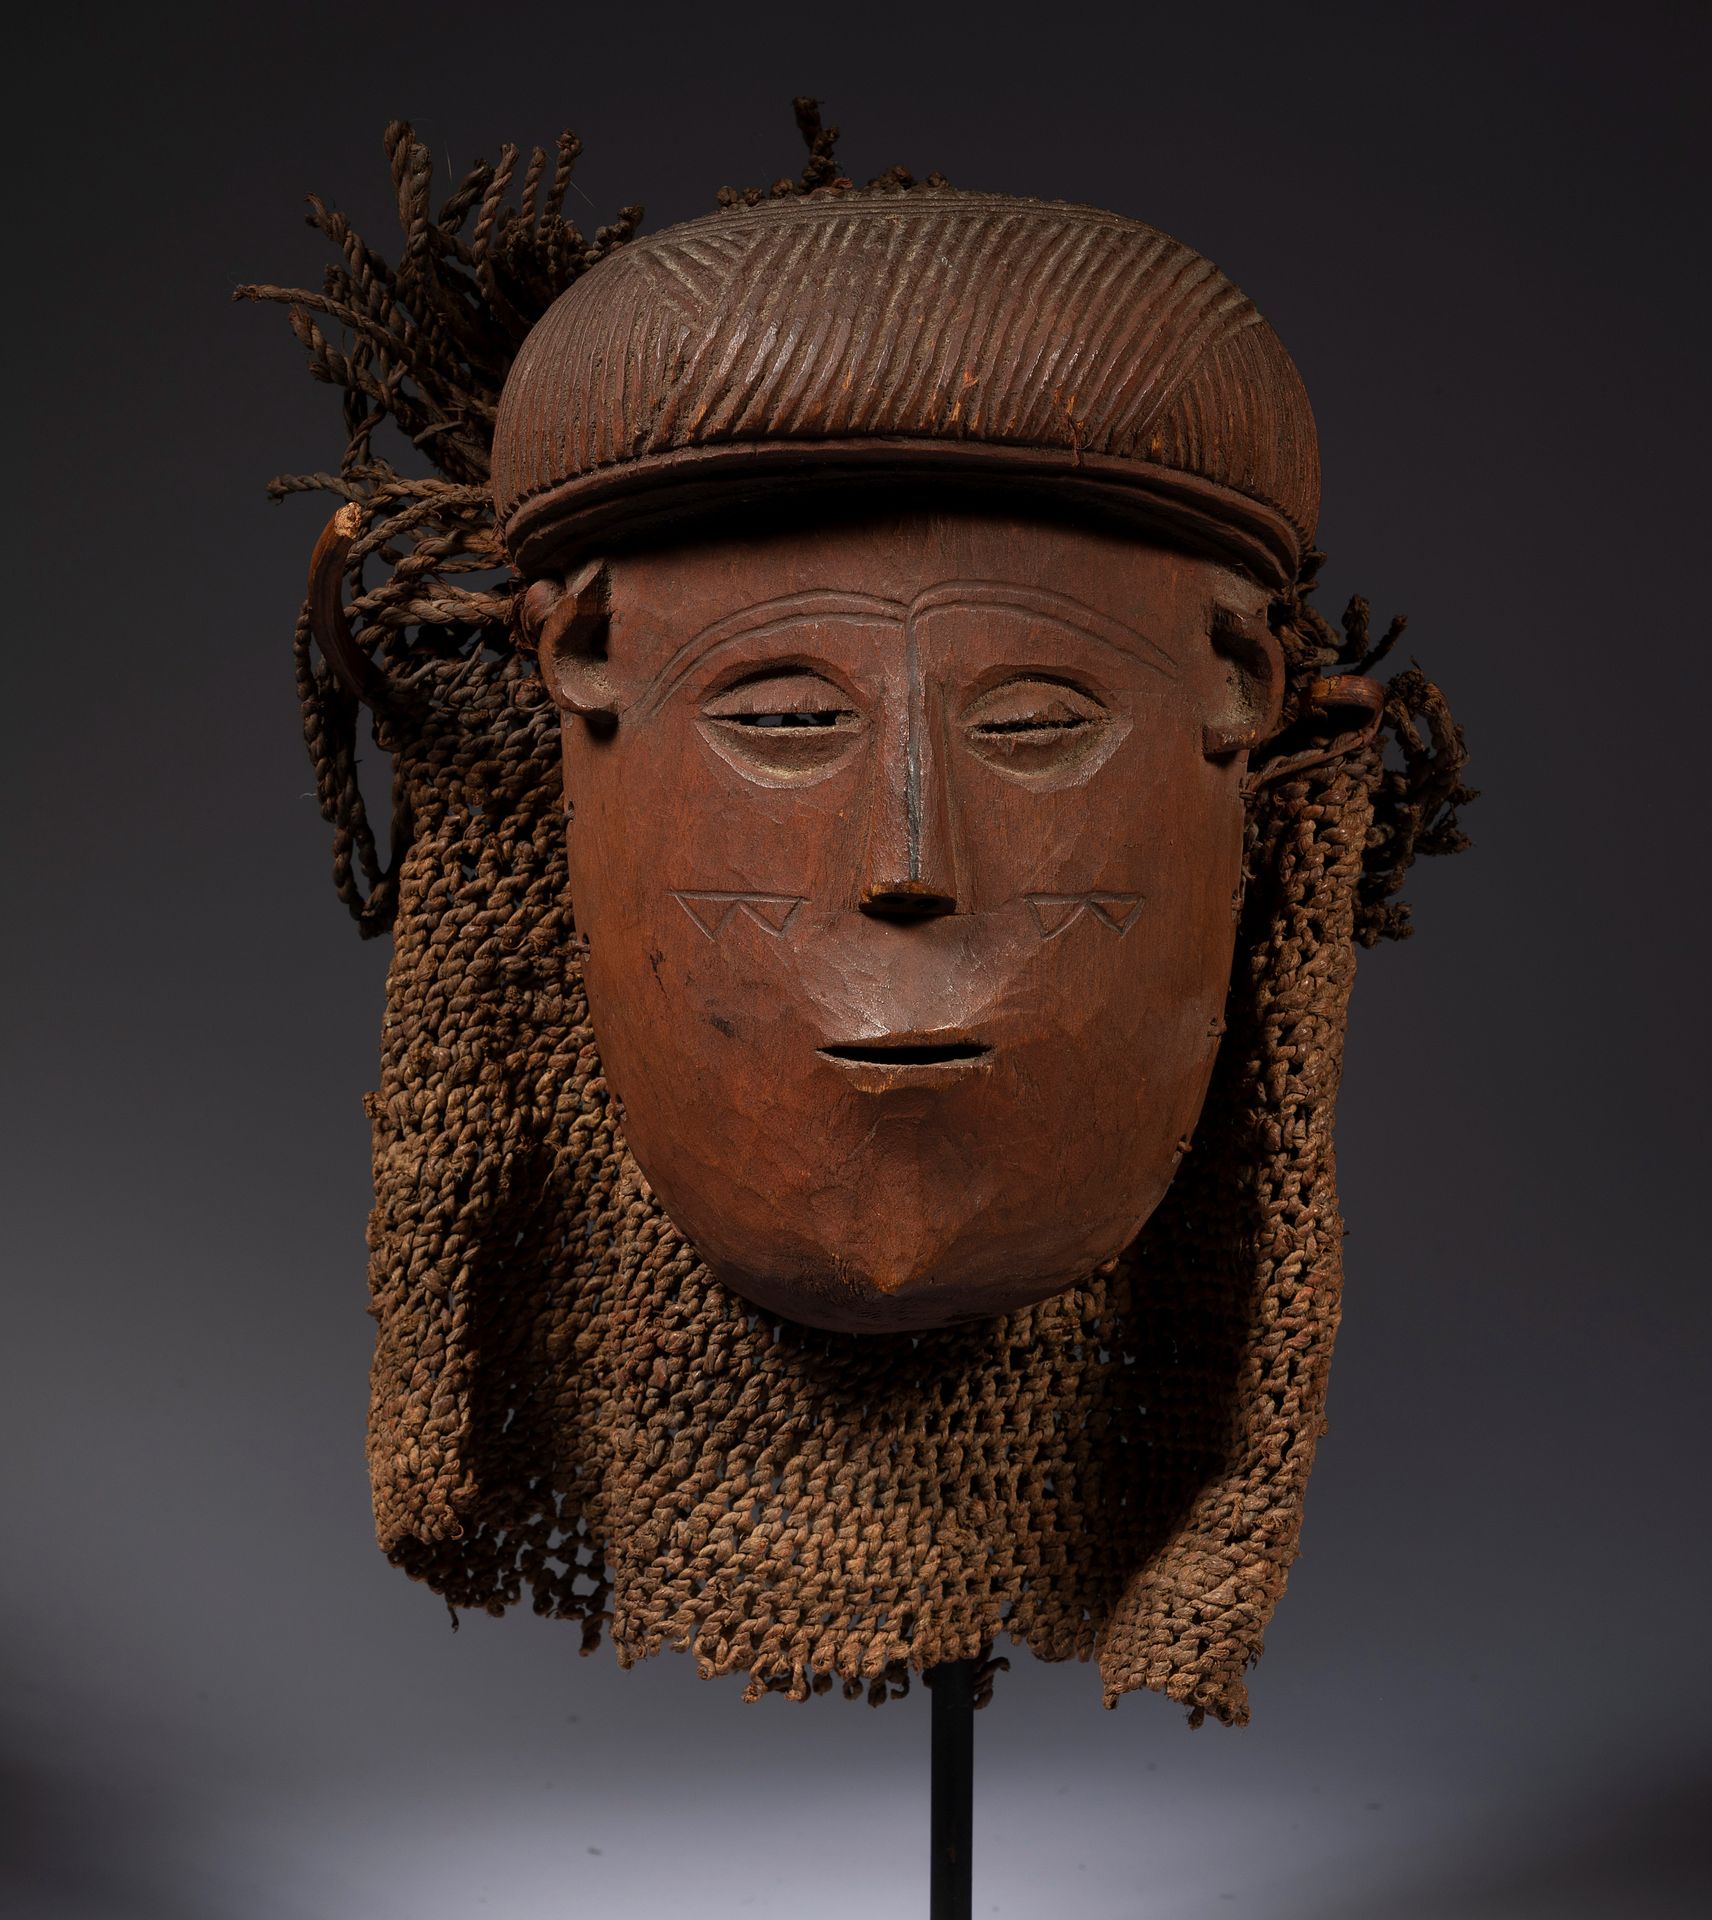 Null *An ancient scarified mask adorned with a carved headdress, with its ancien&hellip;